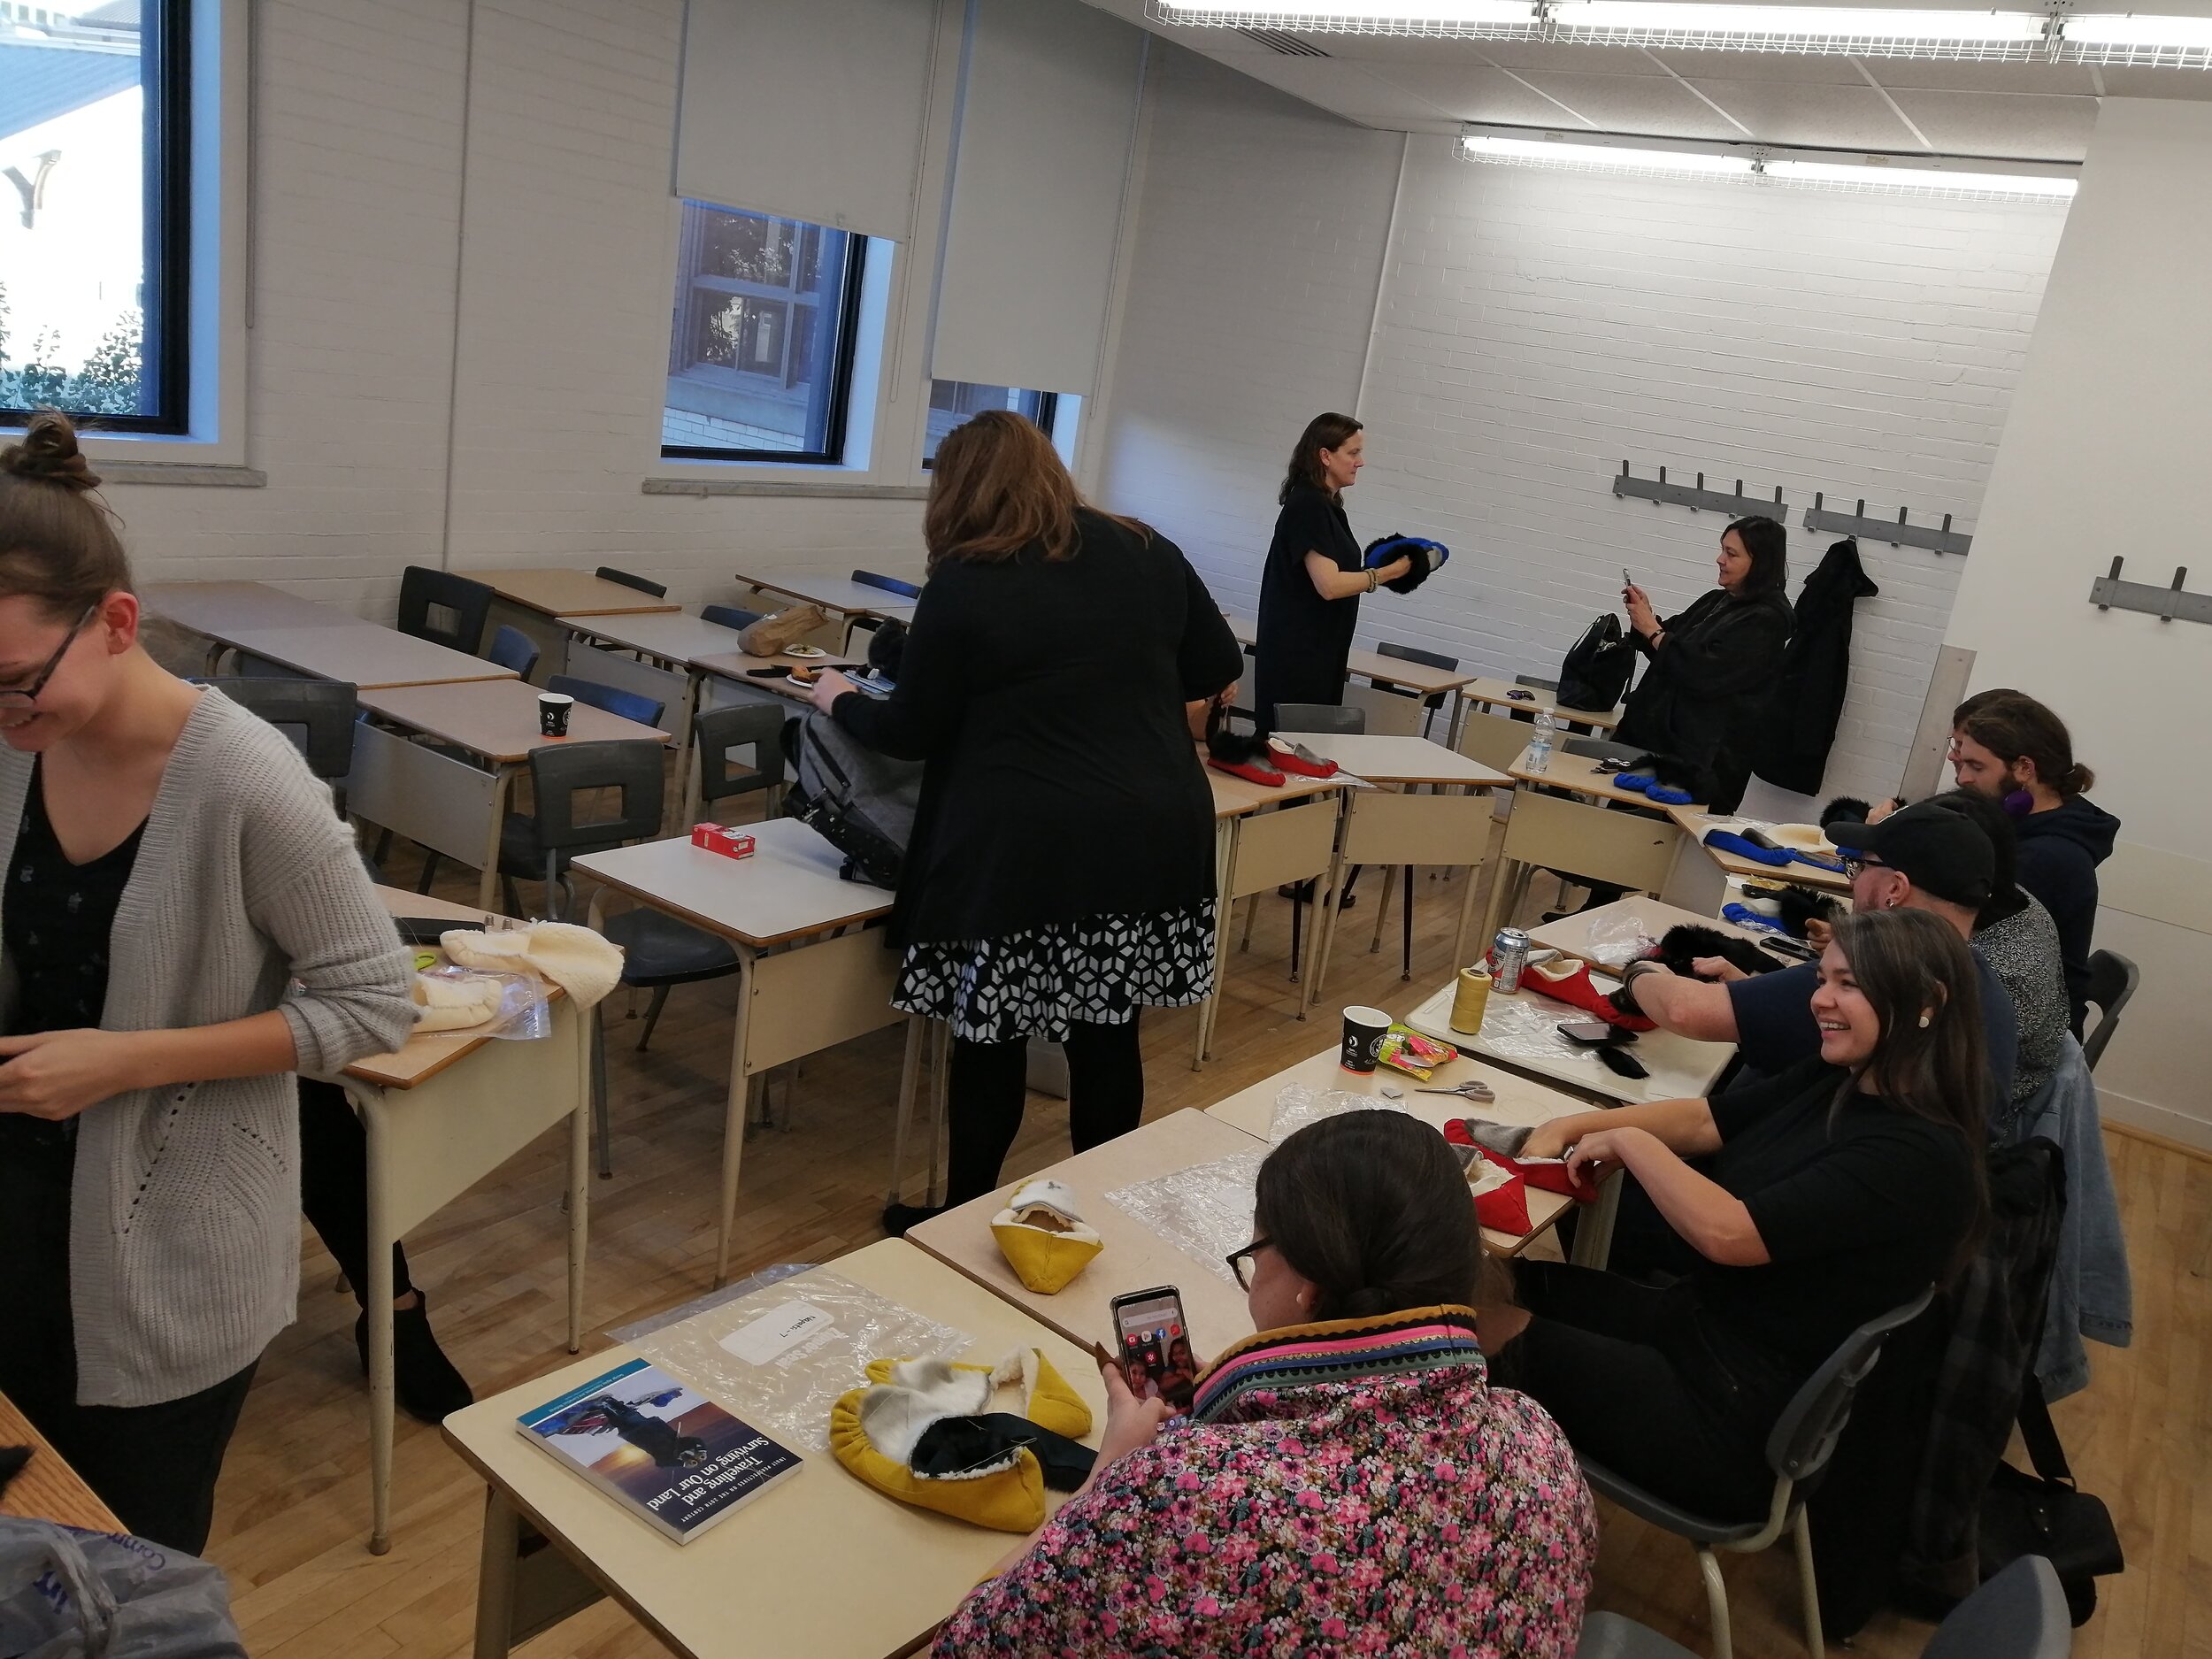  Participants in the Labrador Inuit Slipper Making Workshop, led by Veronica Flowers and Vanessa Flowers, at the 21st Inuit Studies Conference, UQAM, Montreal QC, October 2019. Photo courtesy of Heather Igloliorte. 